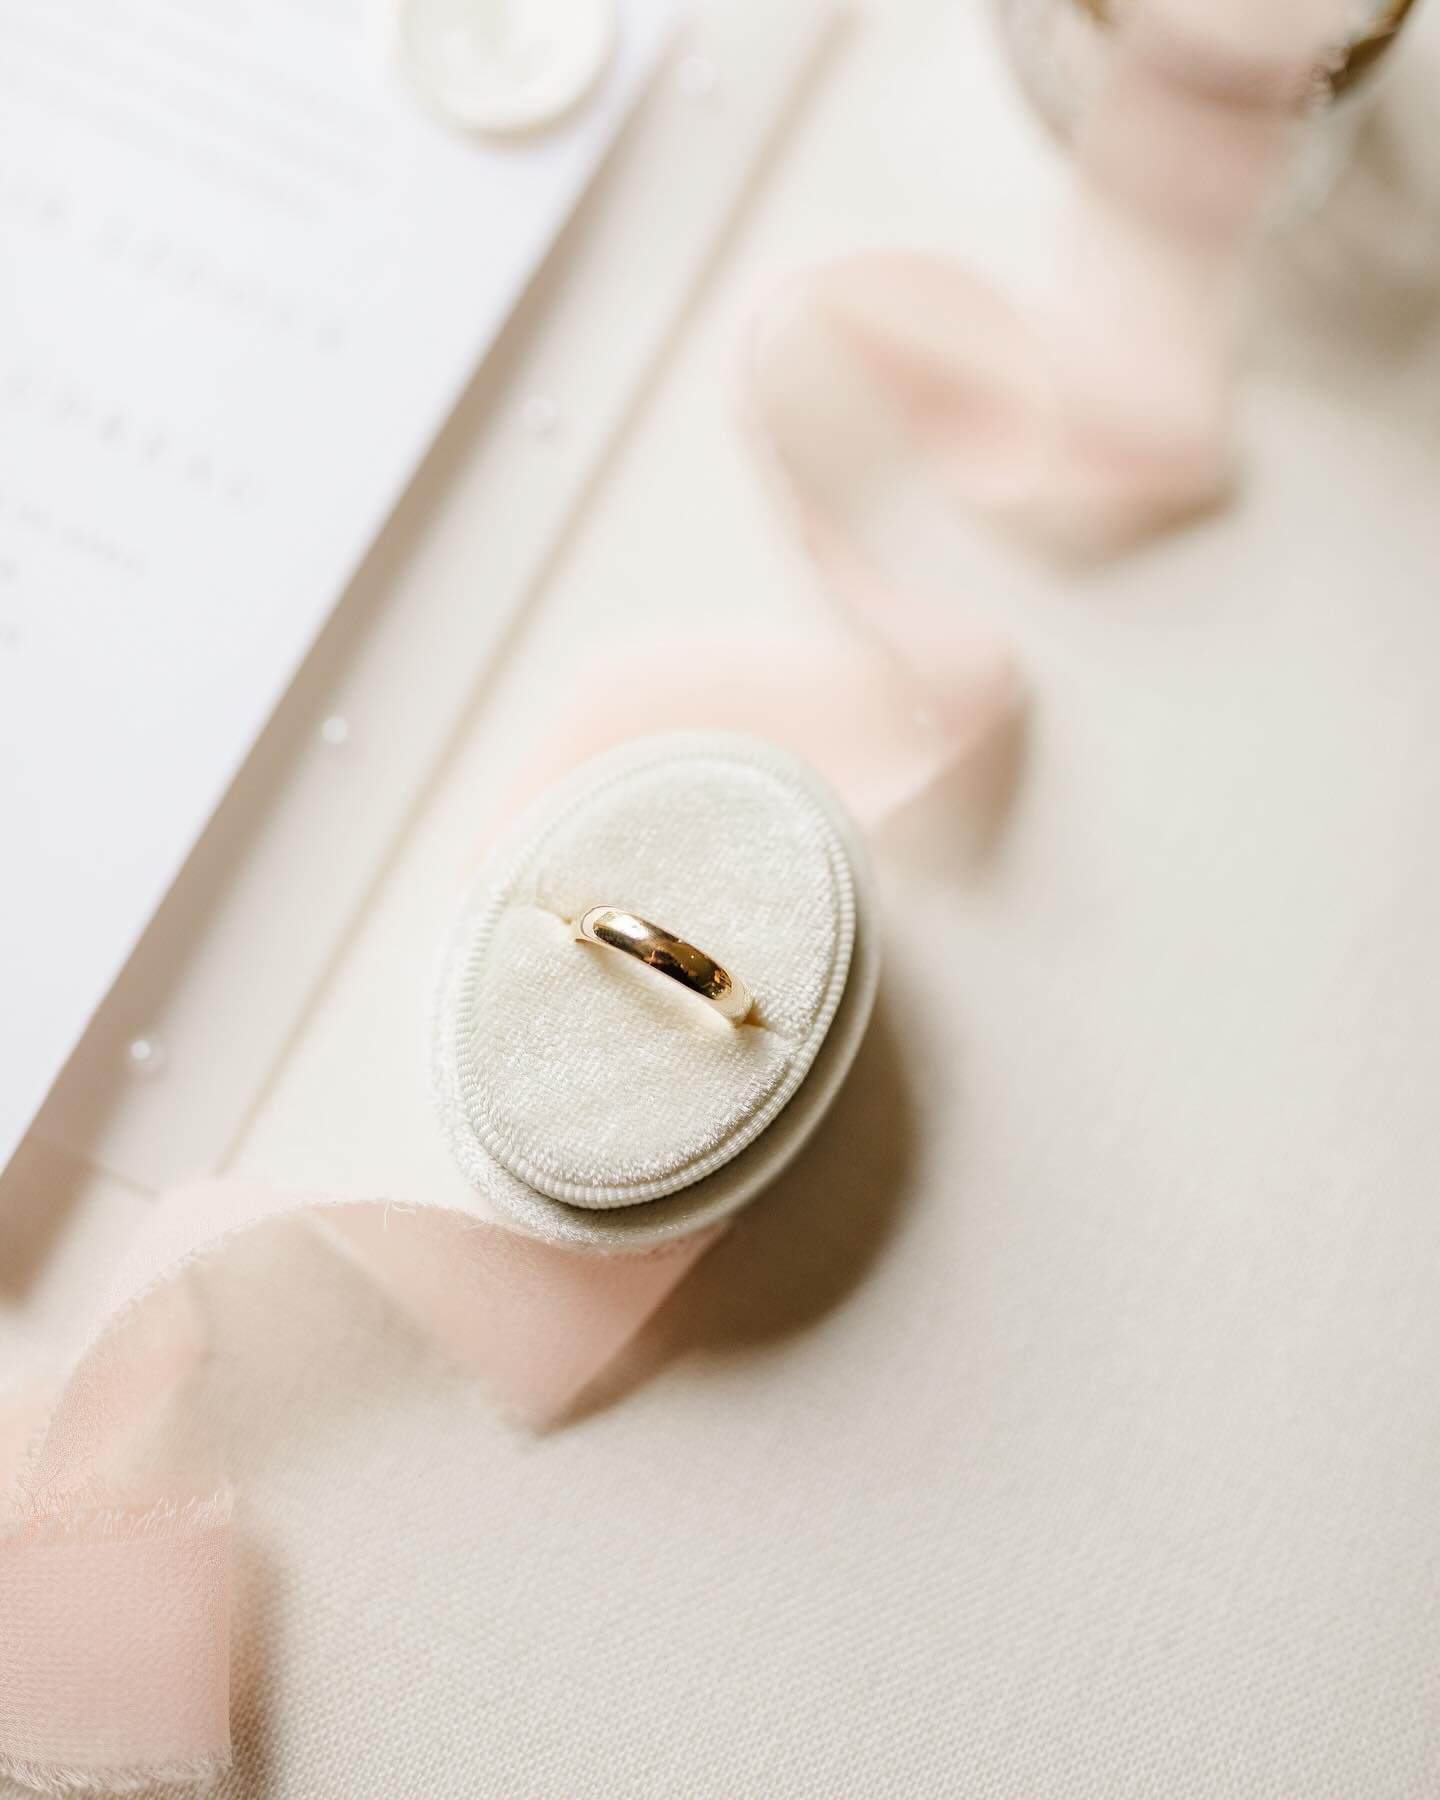 Some of the loveliest details I&rsquo;ve ever captured 🩷 Alexis &amp; Eric&rsquo;s wedding was so elegant and sweet and I can&rsquo;t wait to share more from this lovely day ✨ 

&bull;
&bull;
&bull;

#louisianaphotographer #louisianaweddingphotograp